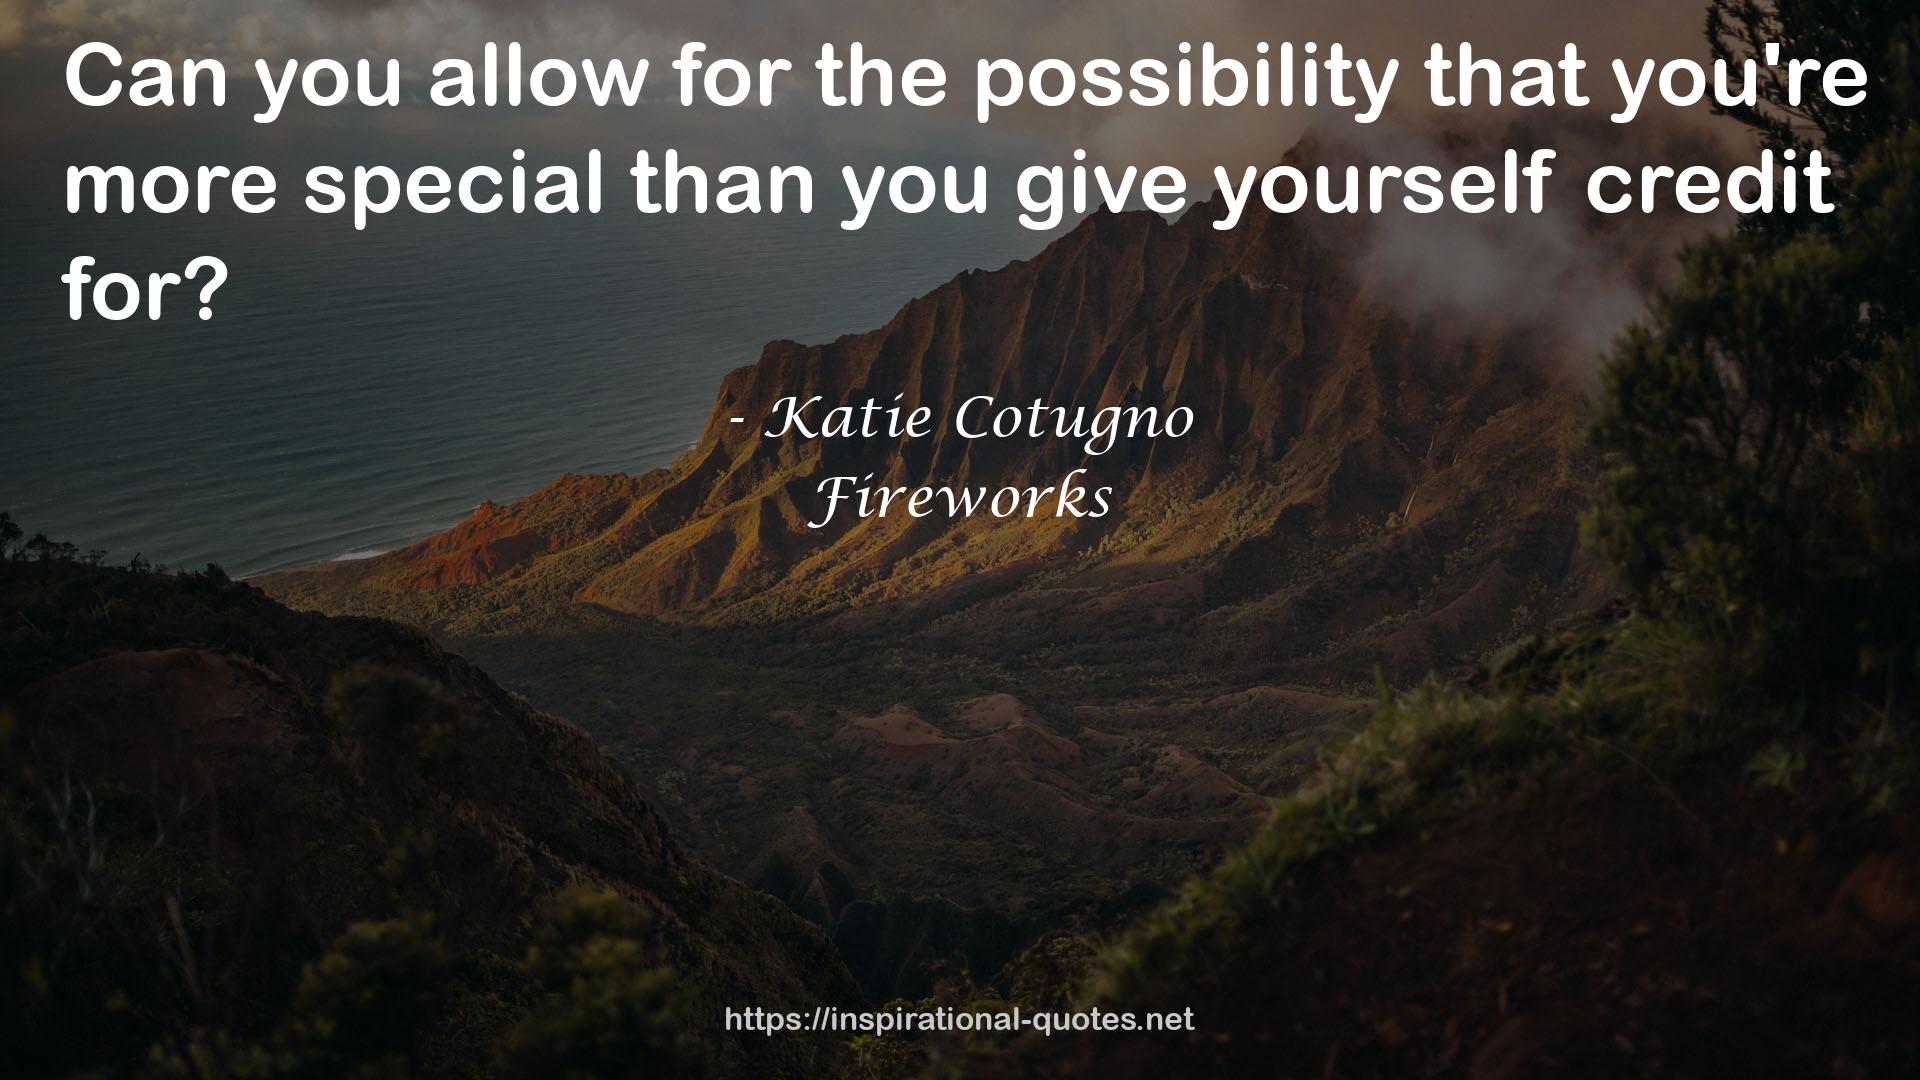 Fireworks QUOTES